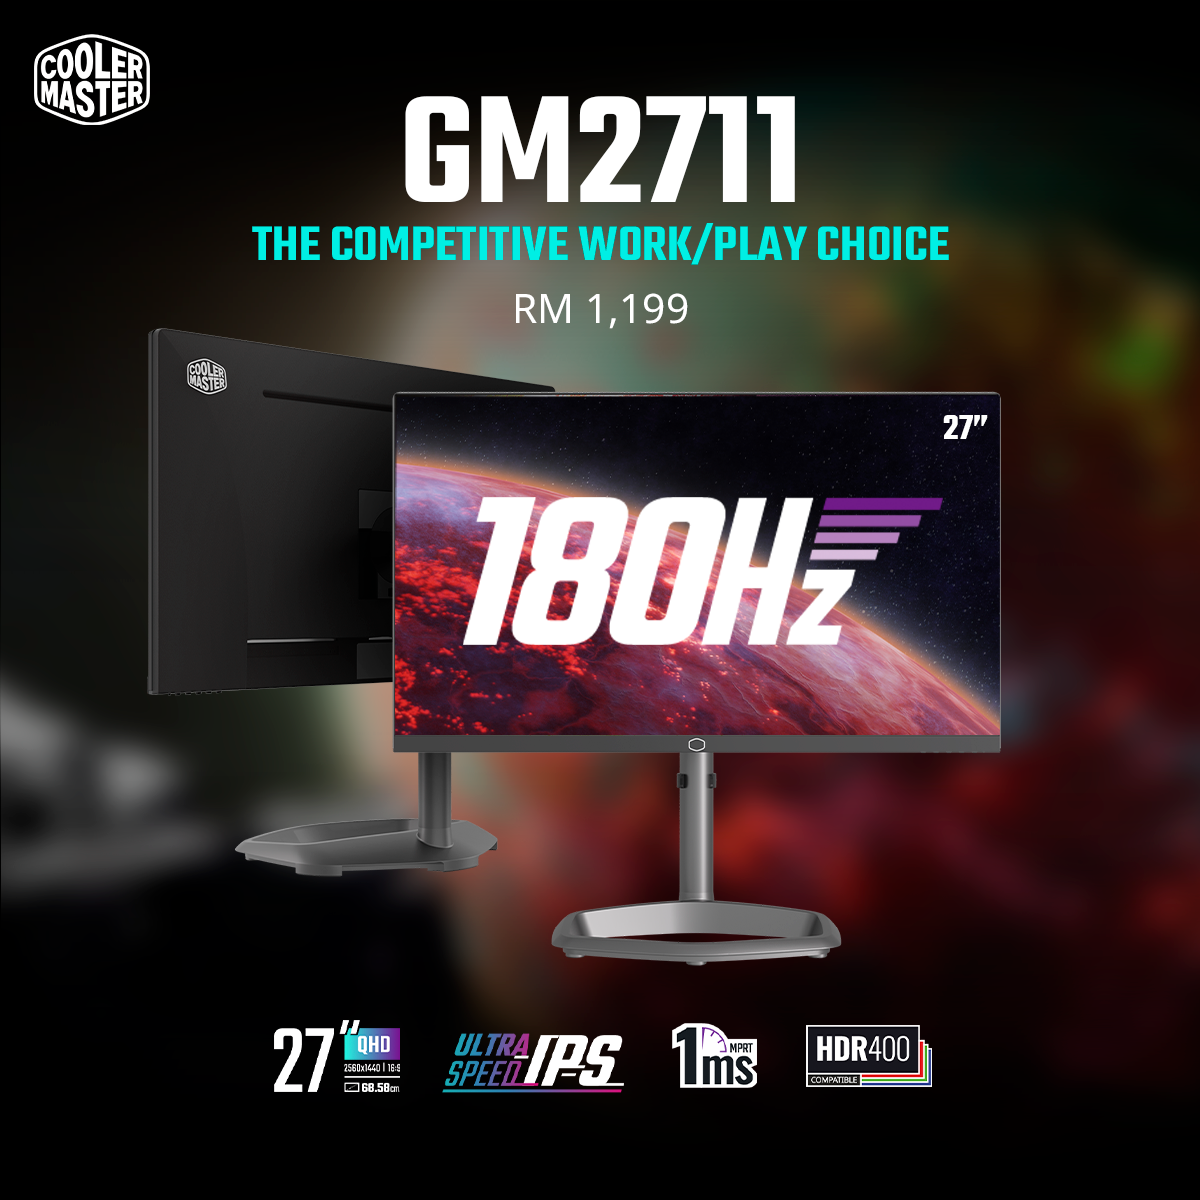 Cooler Master GM2711: Versatile 1440p gaming monitor now available in Malaysia for RM1,199